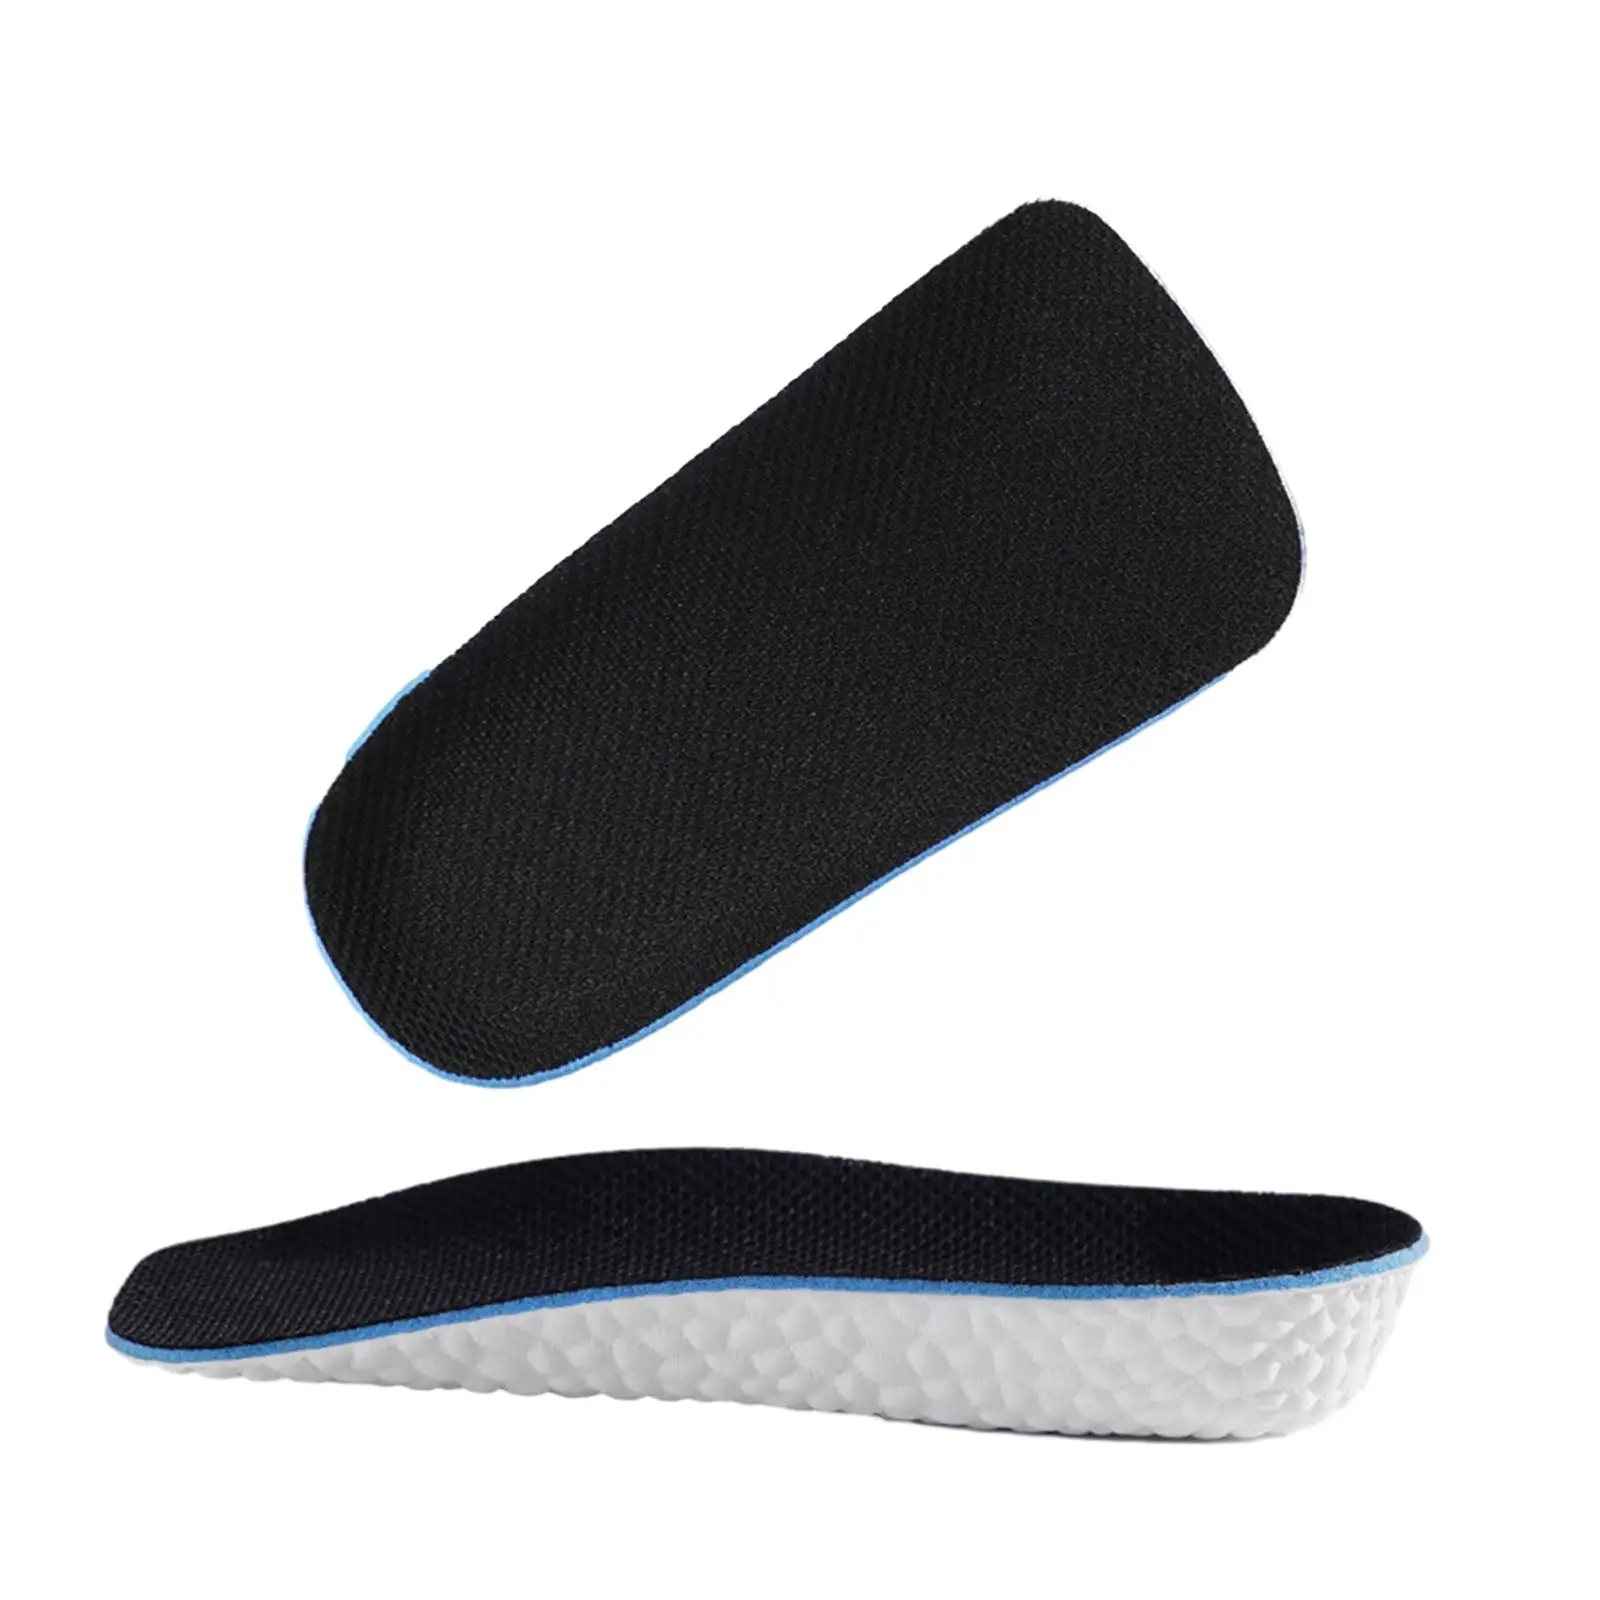 2x Height Increase Insoles Arch Support Insert Cushion Absorb Sweat Invisible Non Slip EVA for Men and Women for Hiking Boots